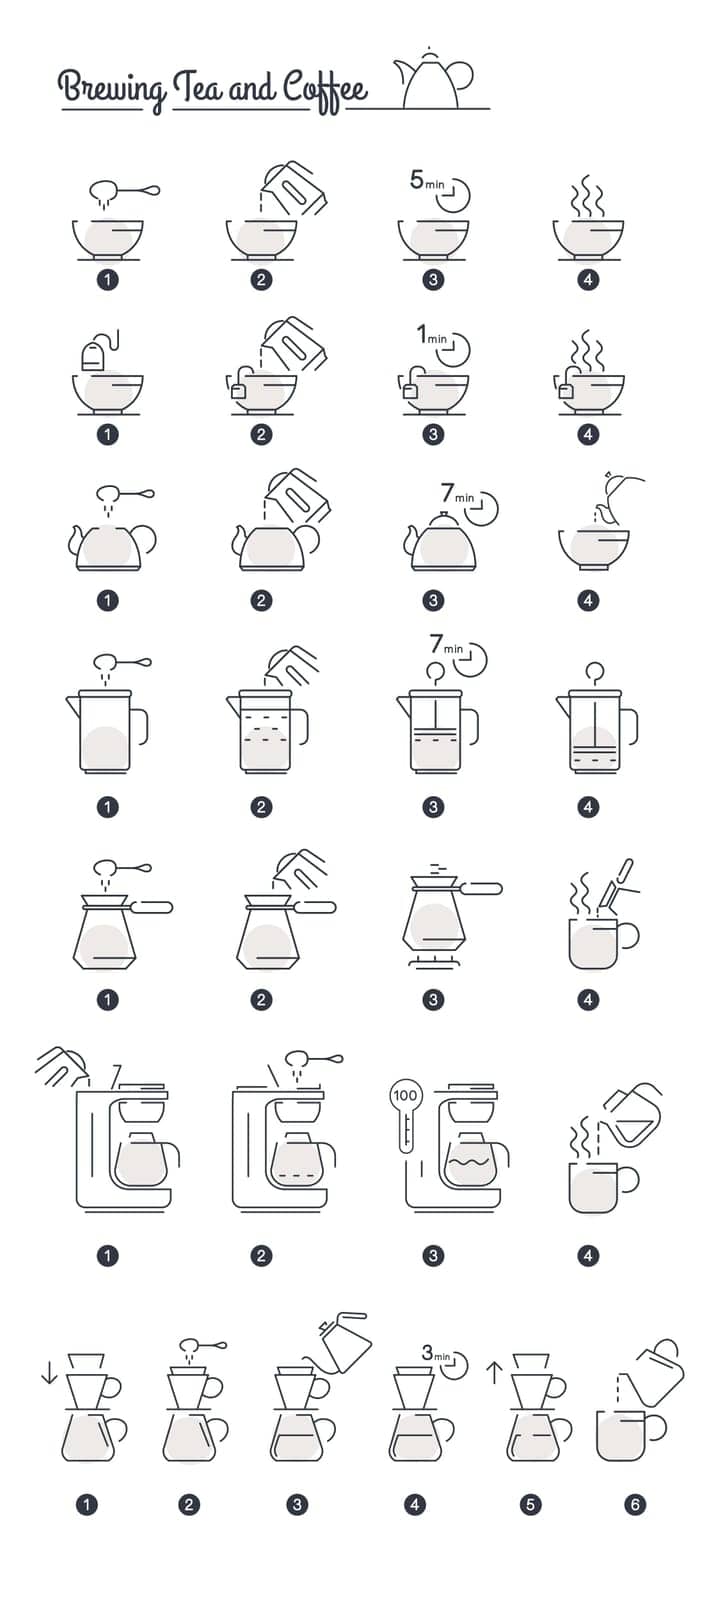 Coffee and tea making steps and instruction vector by Sonulkaster